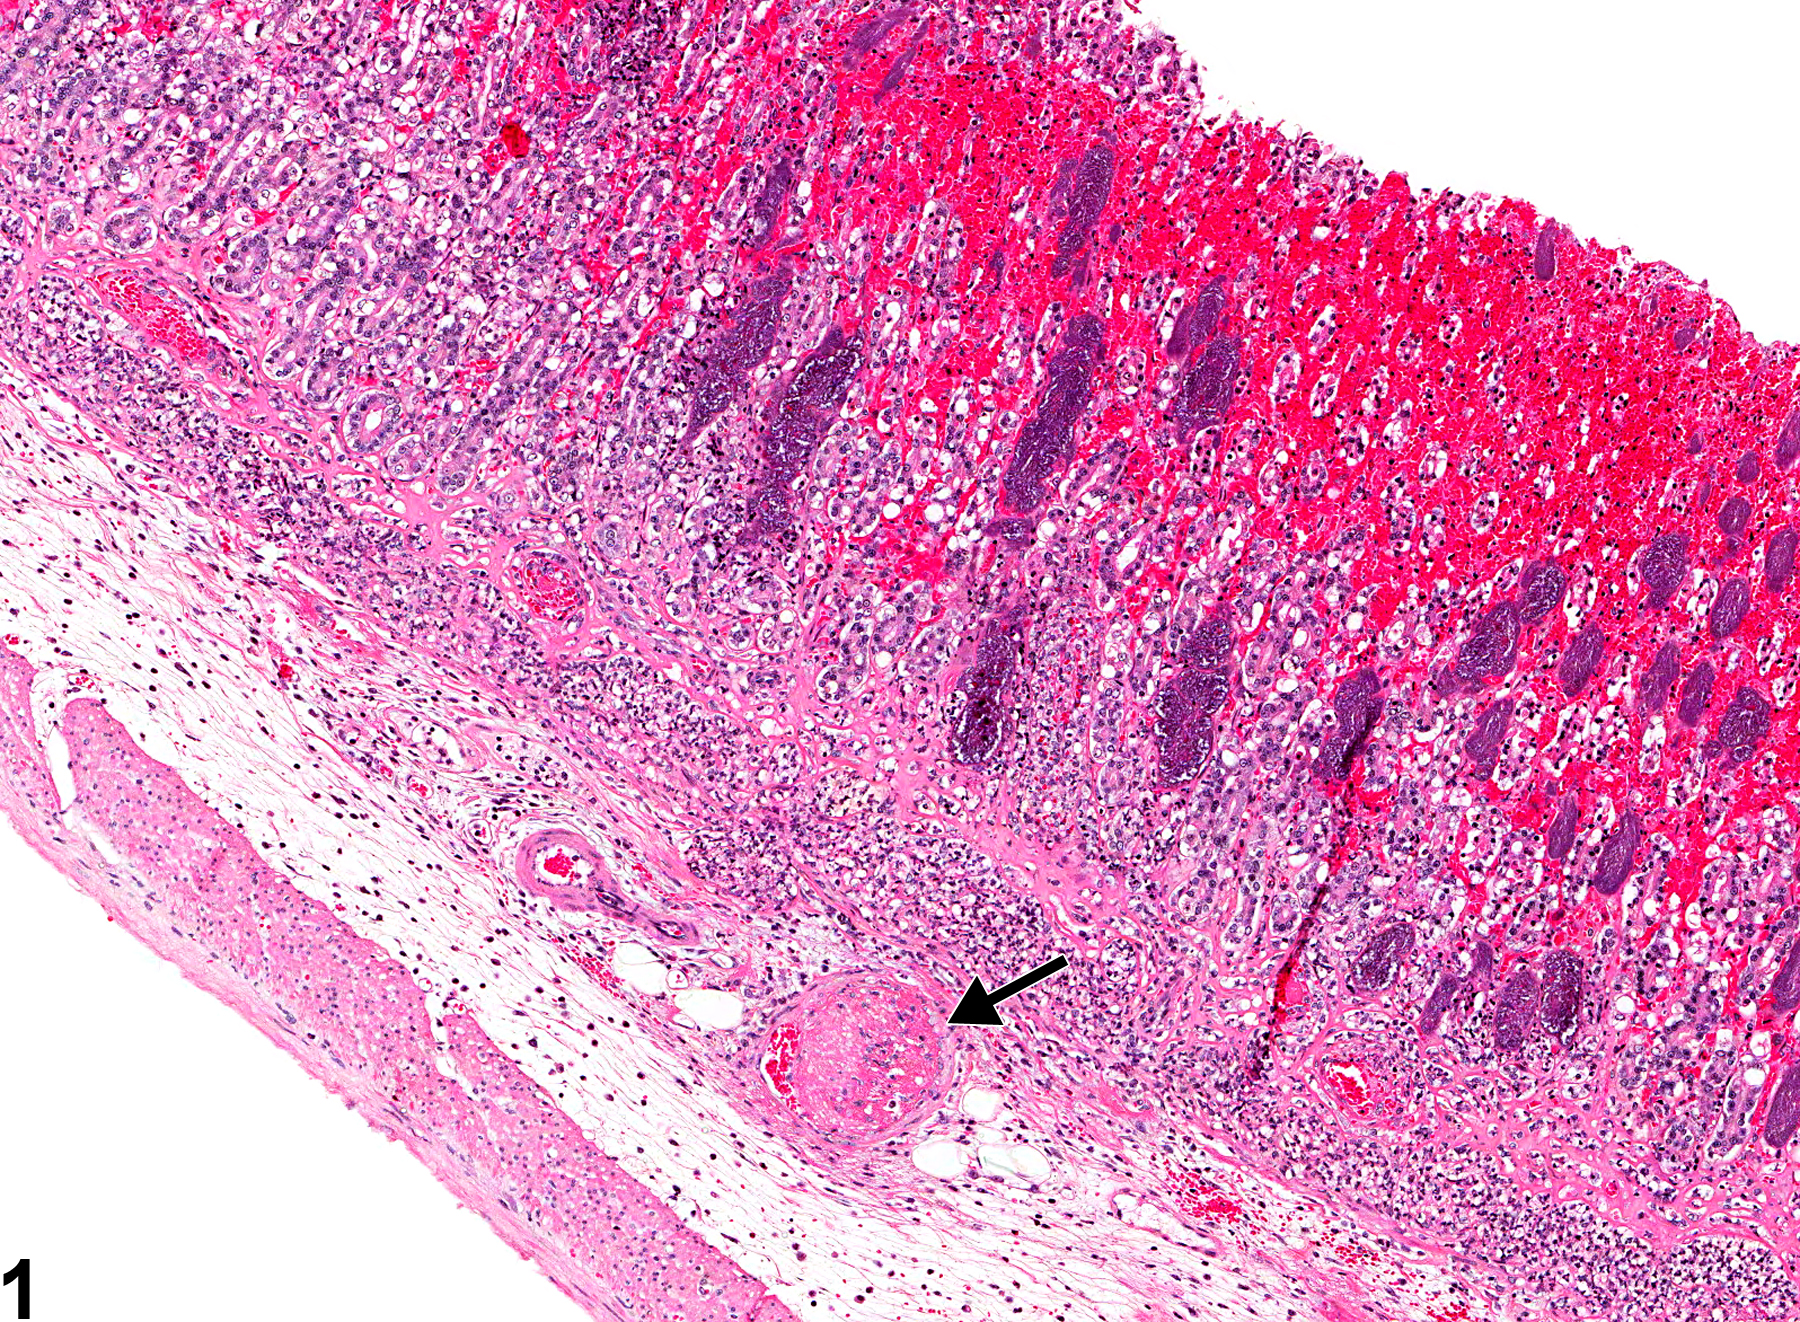 Image of thrombus in the glandular stomach from a male F344/N rat in a chronic study